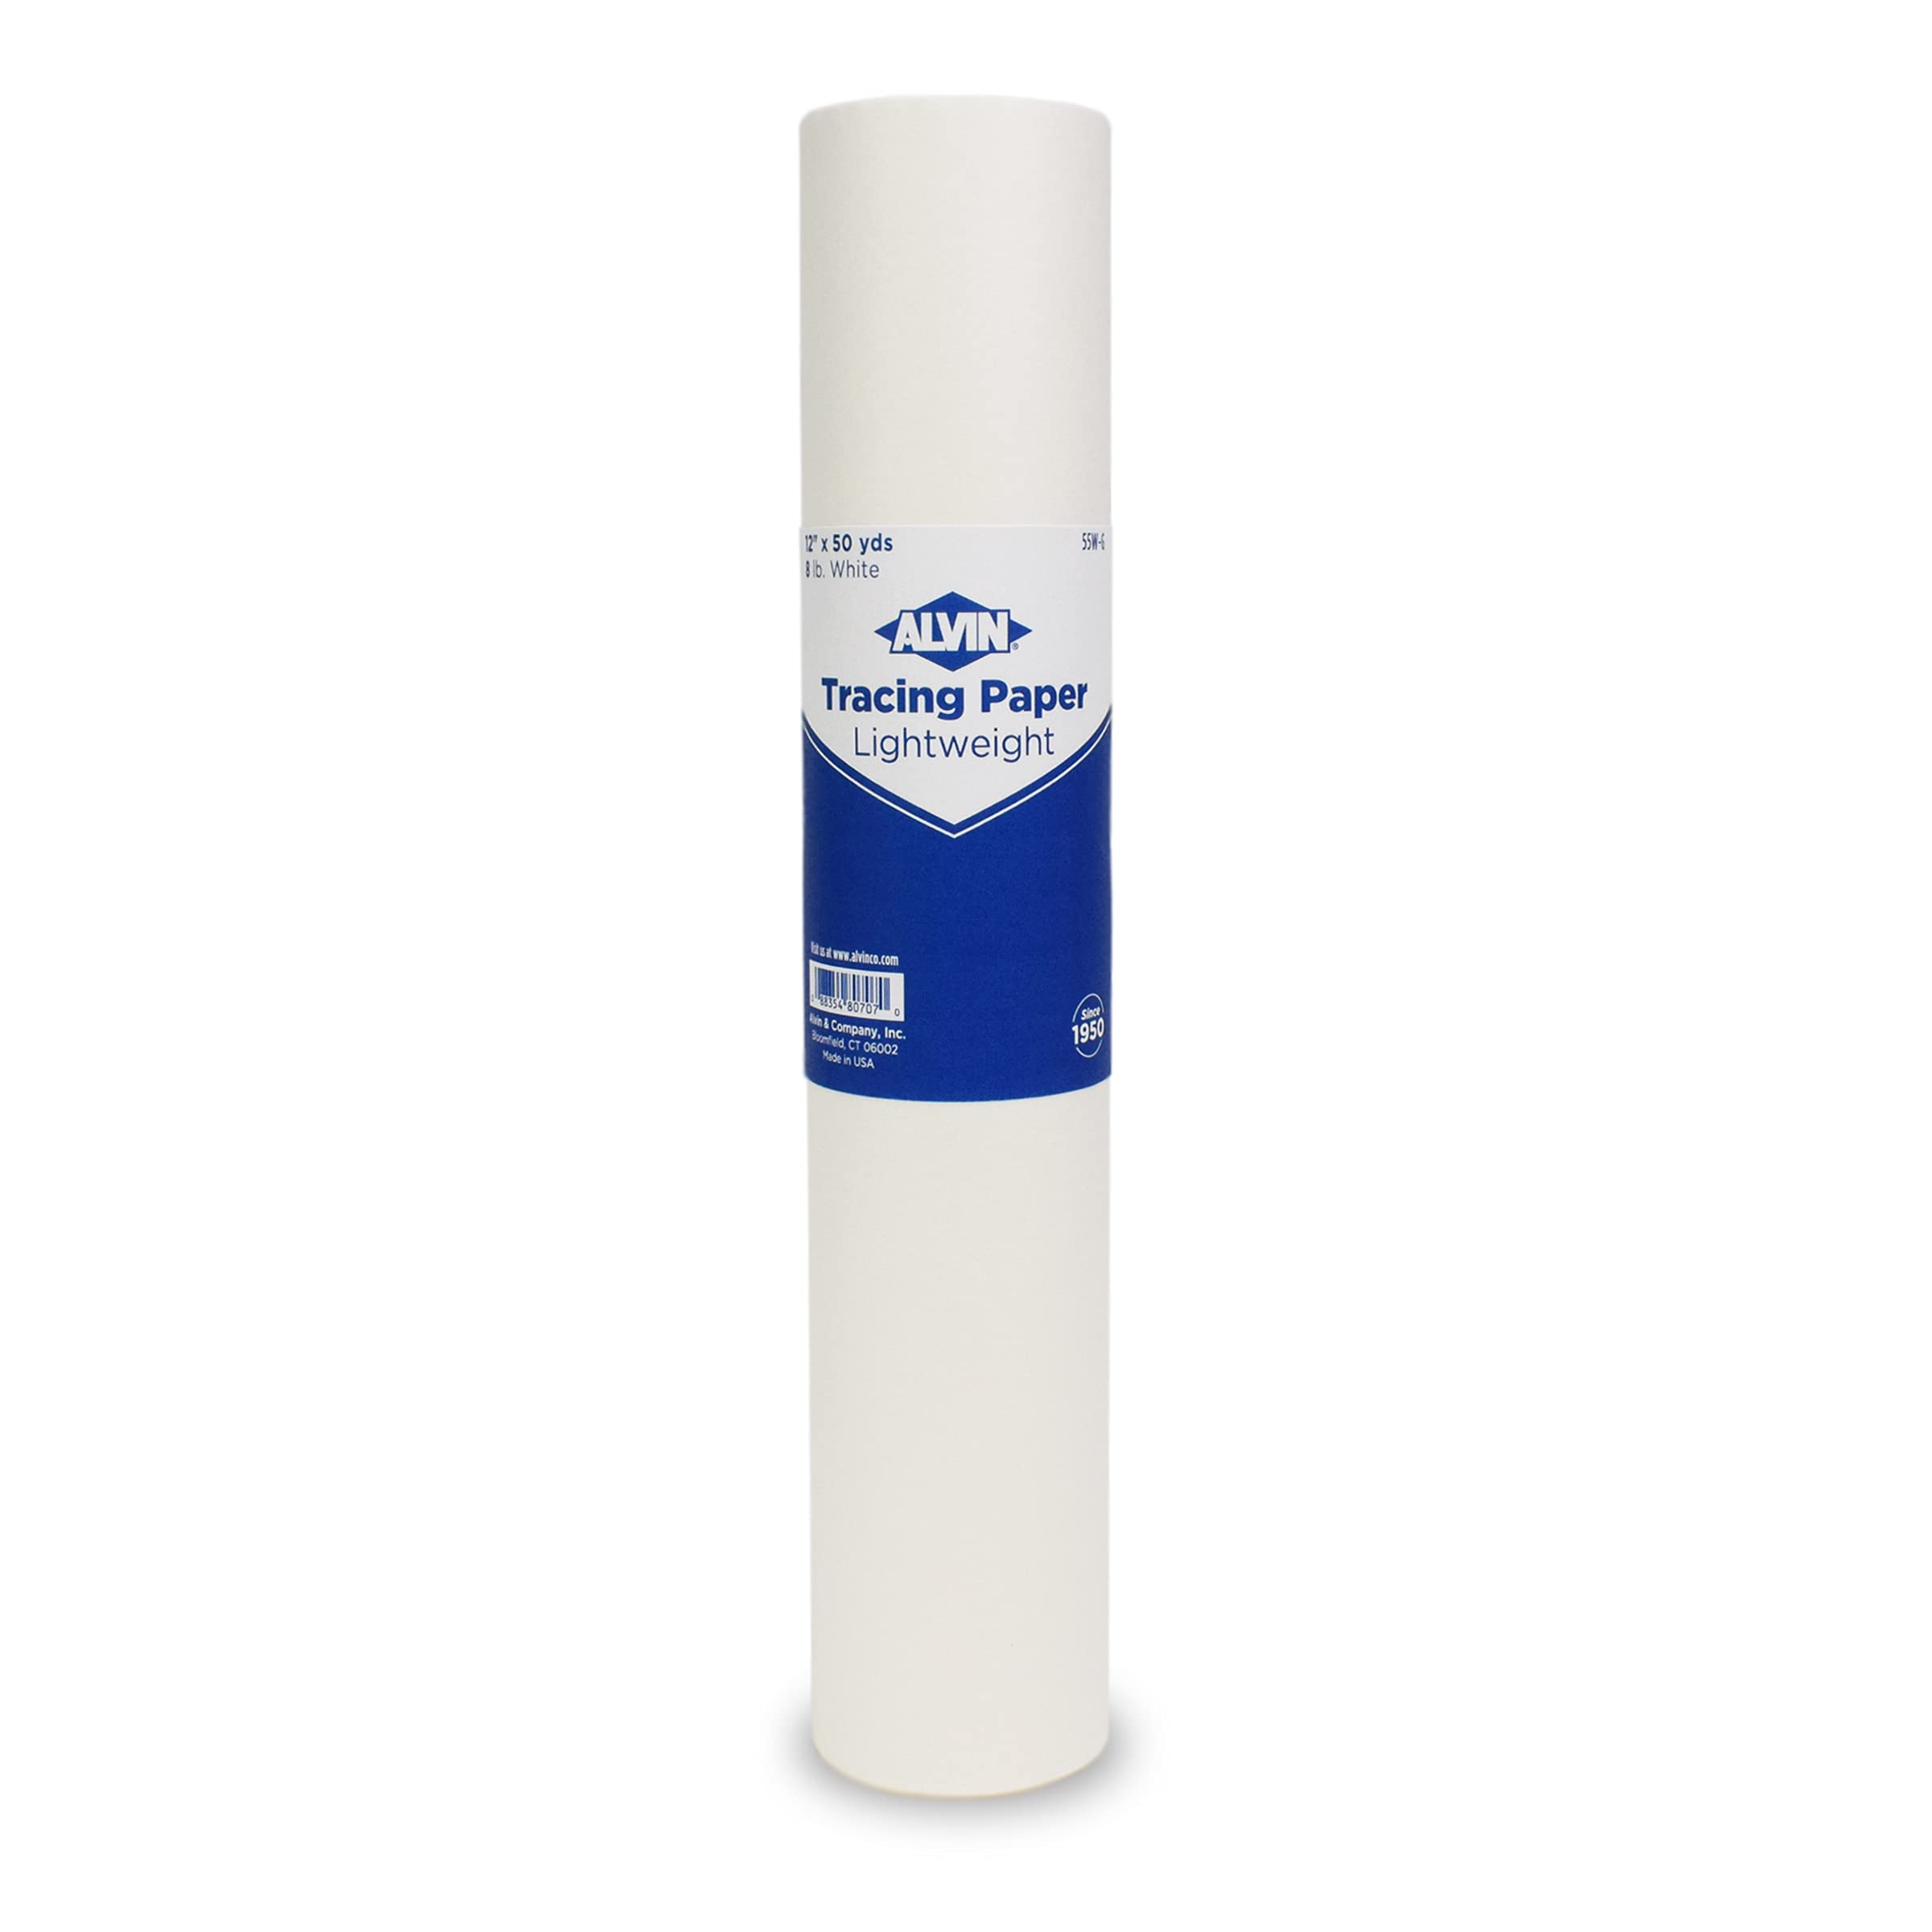 ALVIN 55W-G Lightweight Tracing Paper Roll, White, Suitable with Ink,  Charcoal, Felt Tip Pen, for Sketching or Detailing - 12 Inches, 50 Yards,  1-inch Core 12 50 Yards